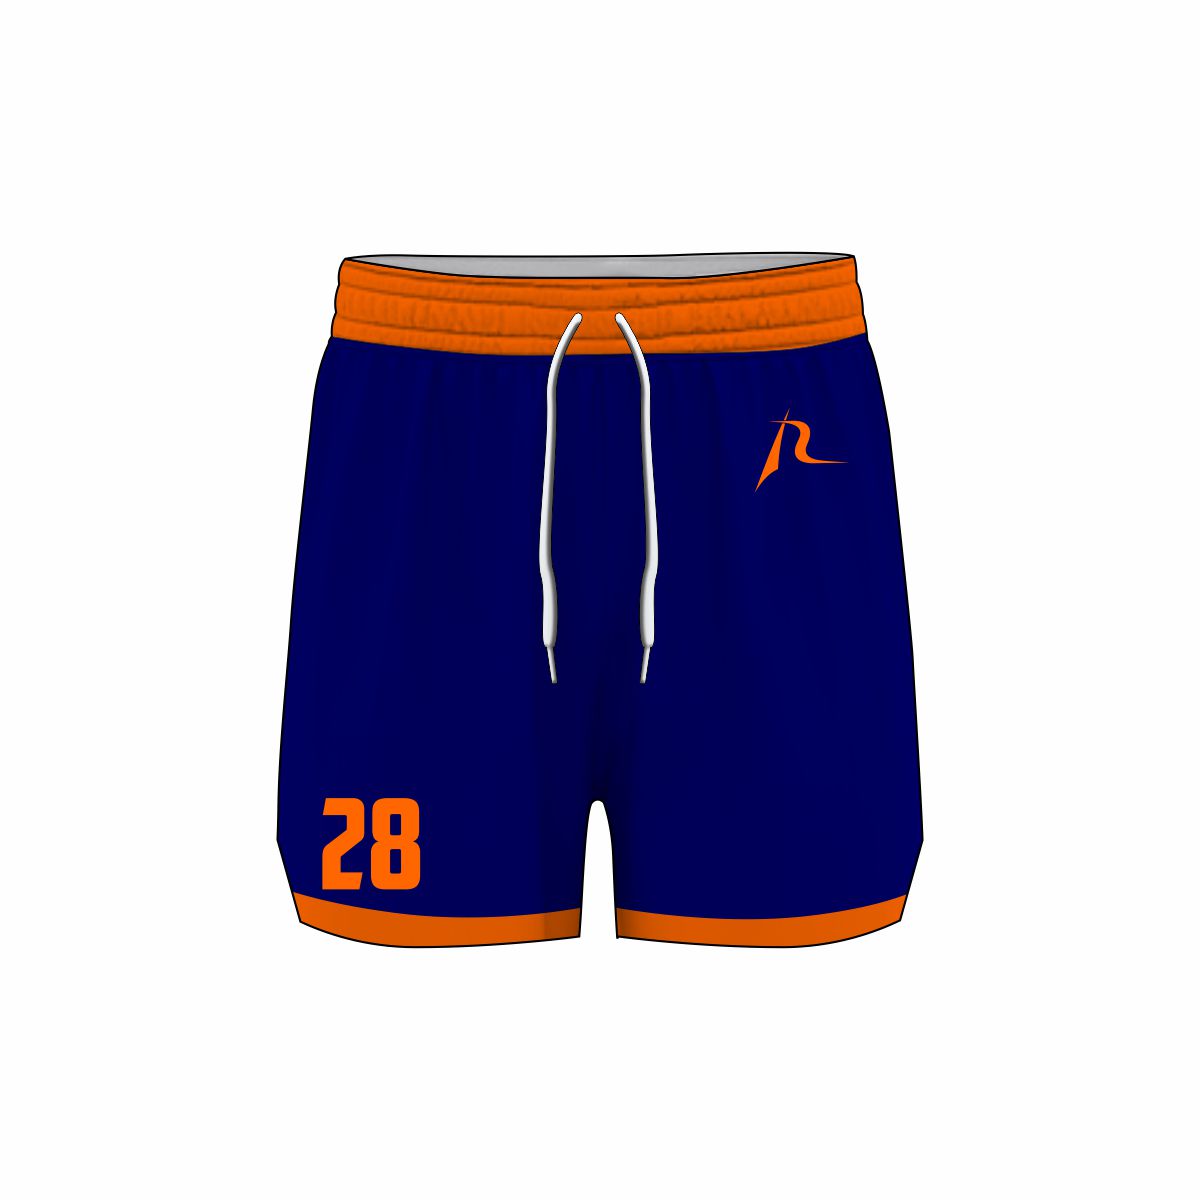 Exceed Rugby Shorts